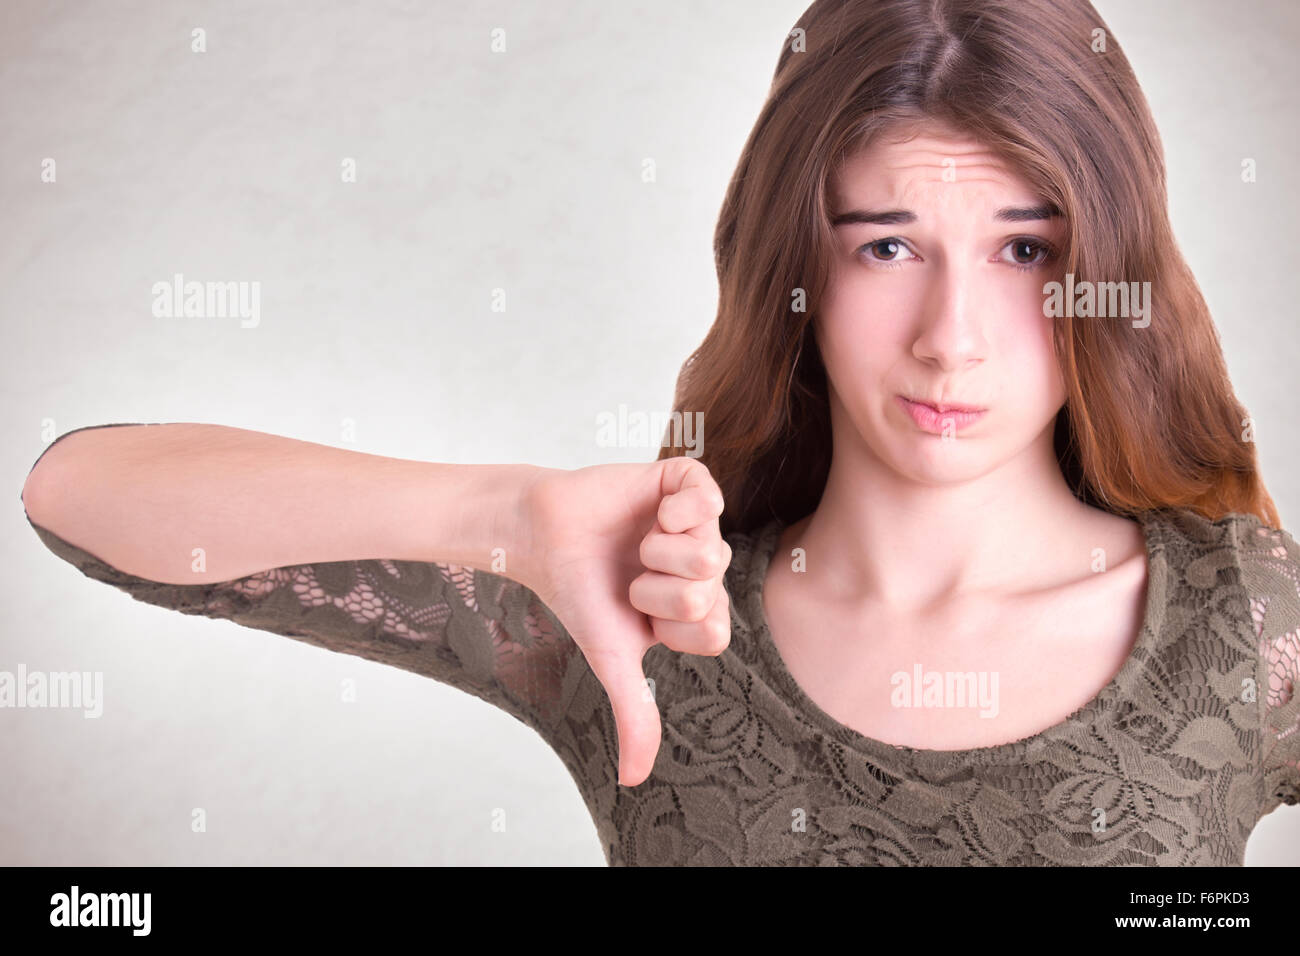 Woman showning negative feelings with her thumb down, isolated in grey Stock Photo